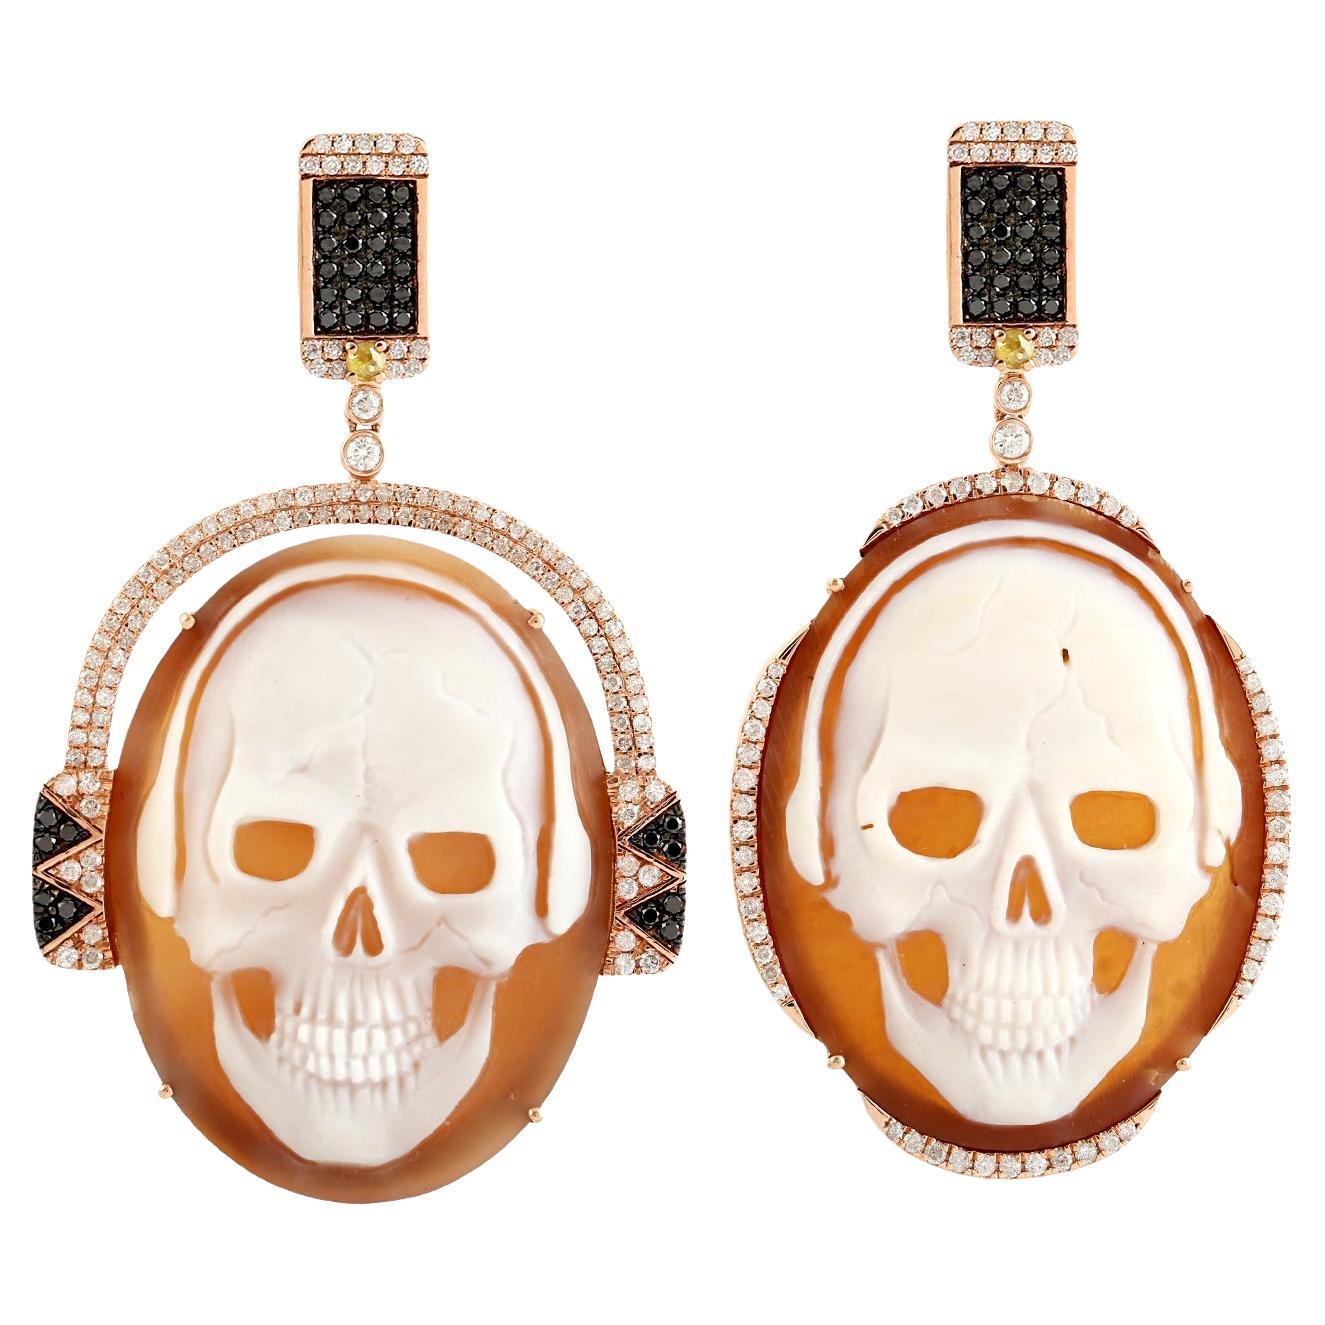 Carved Skull Sardonyx Earrings With Diamonds Made In 18k Rose Gold For Sale